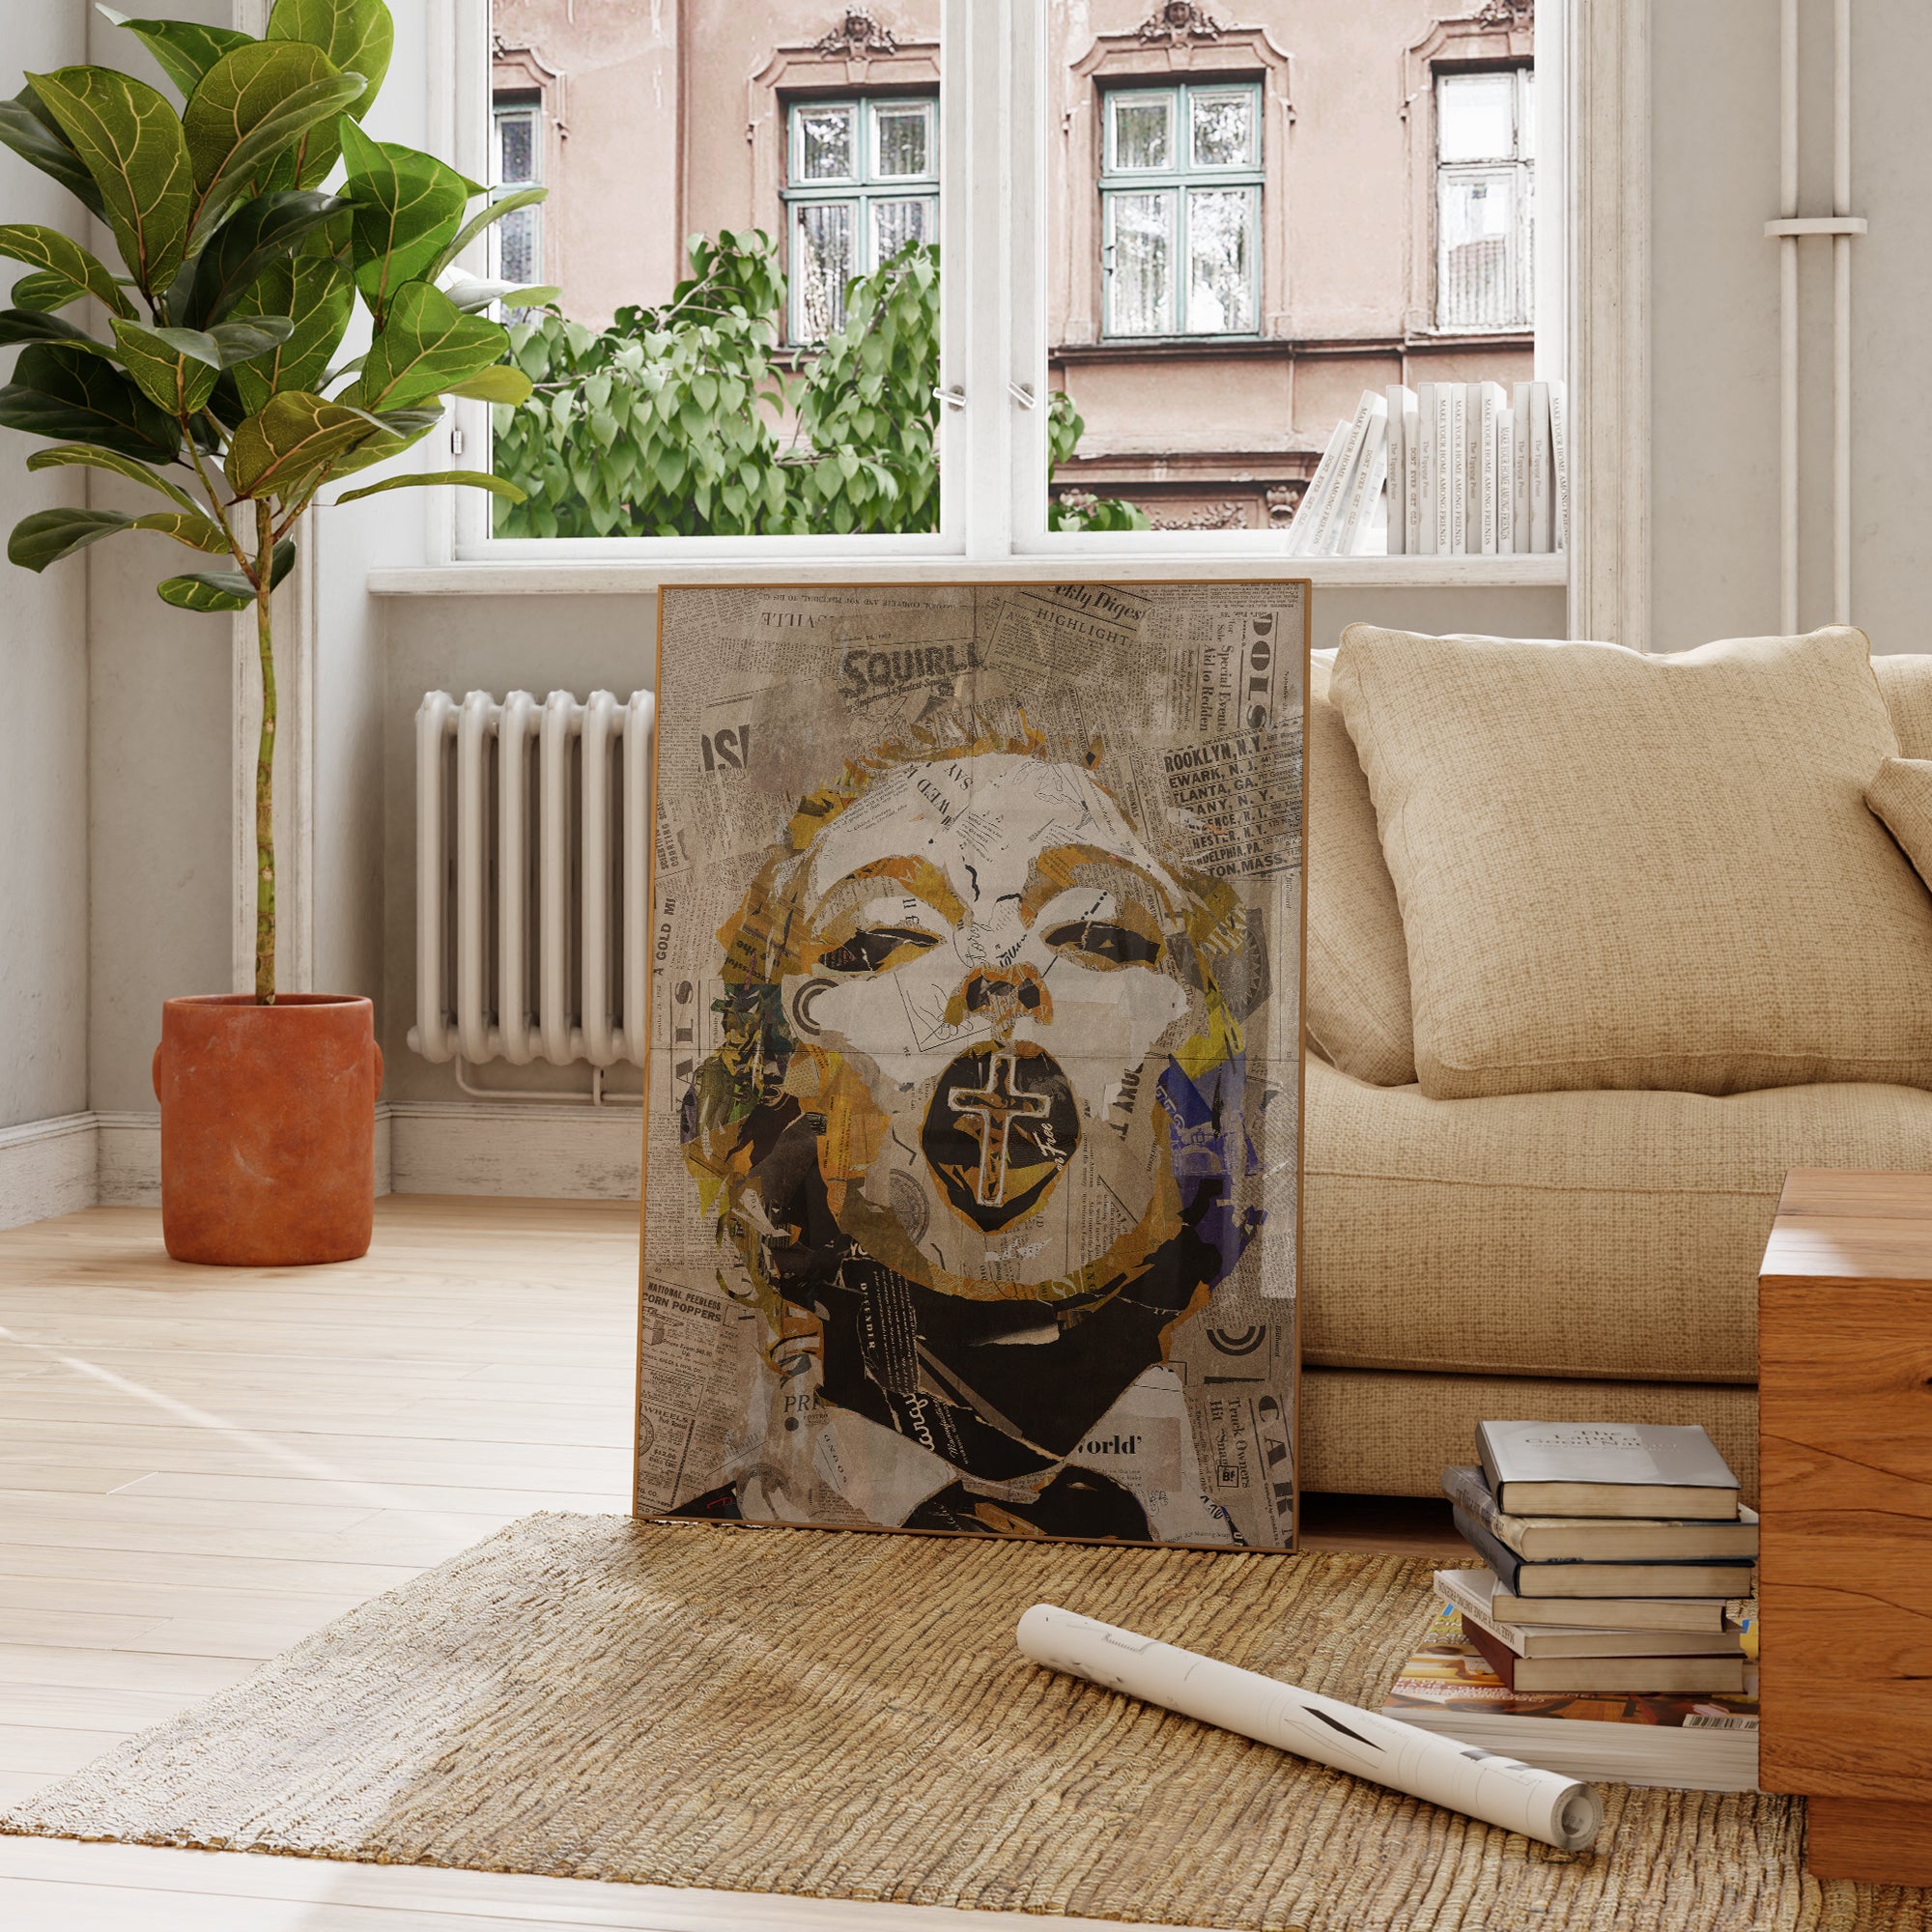 Be inspired by our iconic collage portrait art print of Madonna. This artwork was printed using the giclée process on archival acid-free paper and is presented in a French living room, capturing its timeless beauty in every detail.